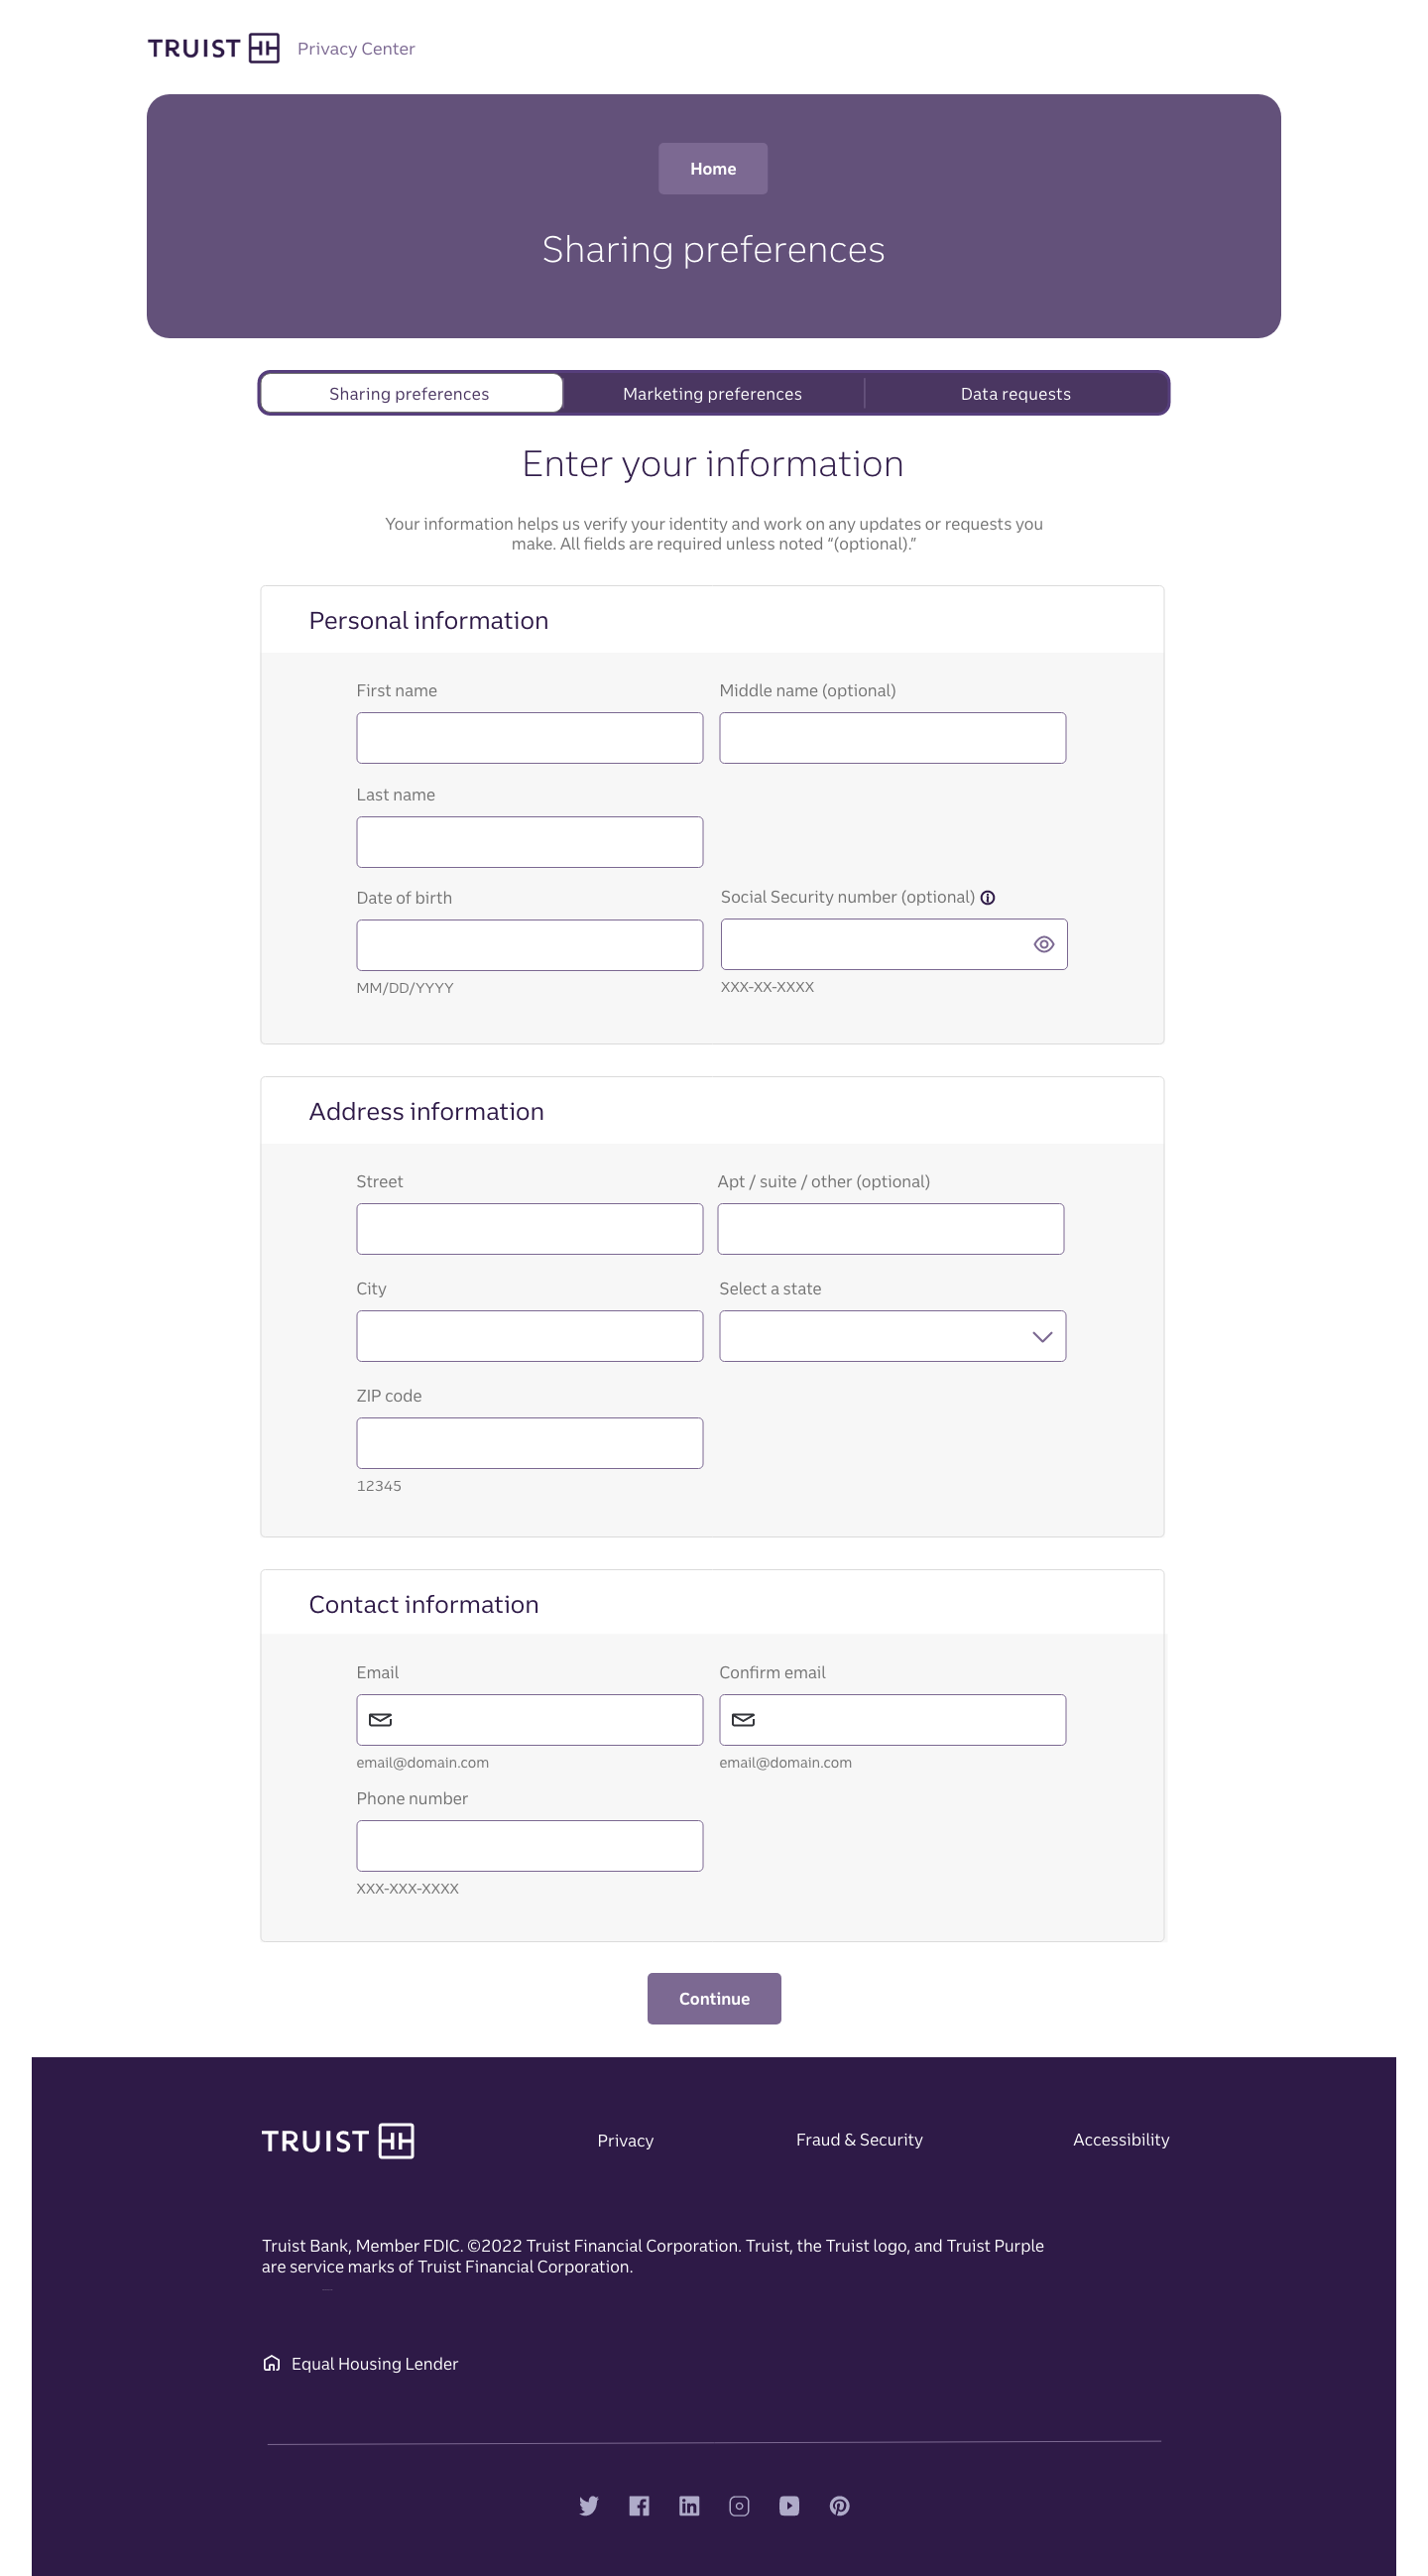 Privacy Portal forms and information entry